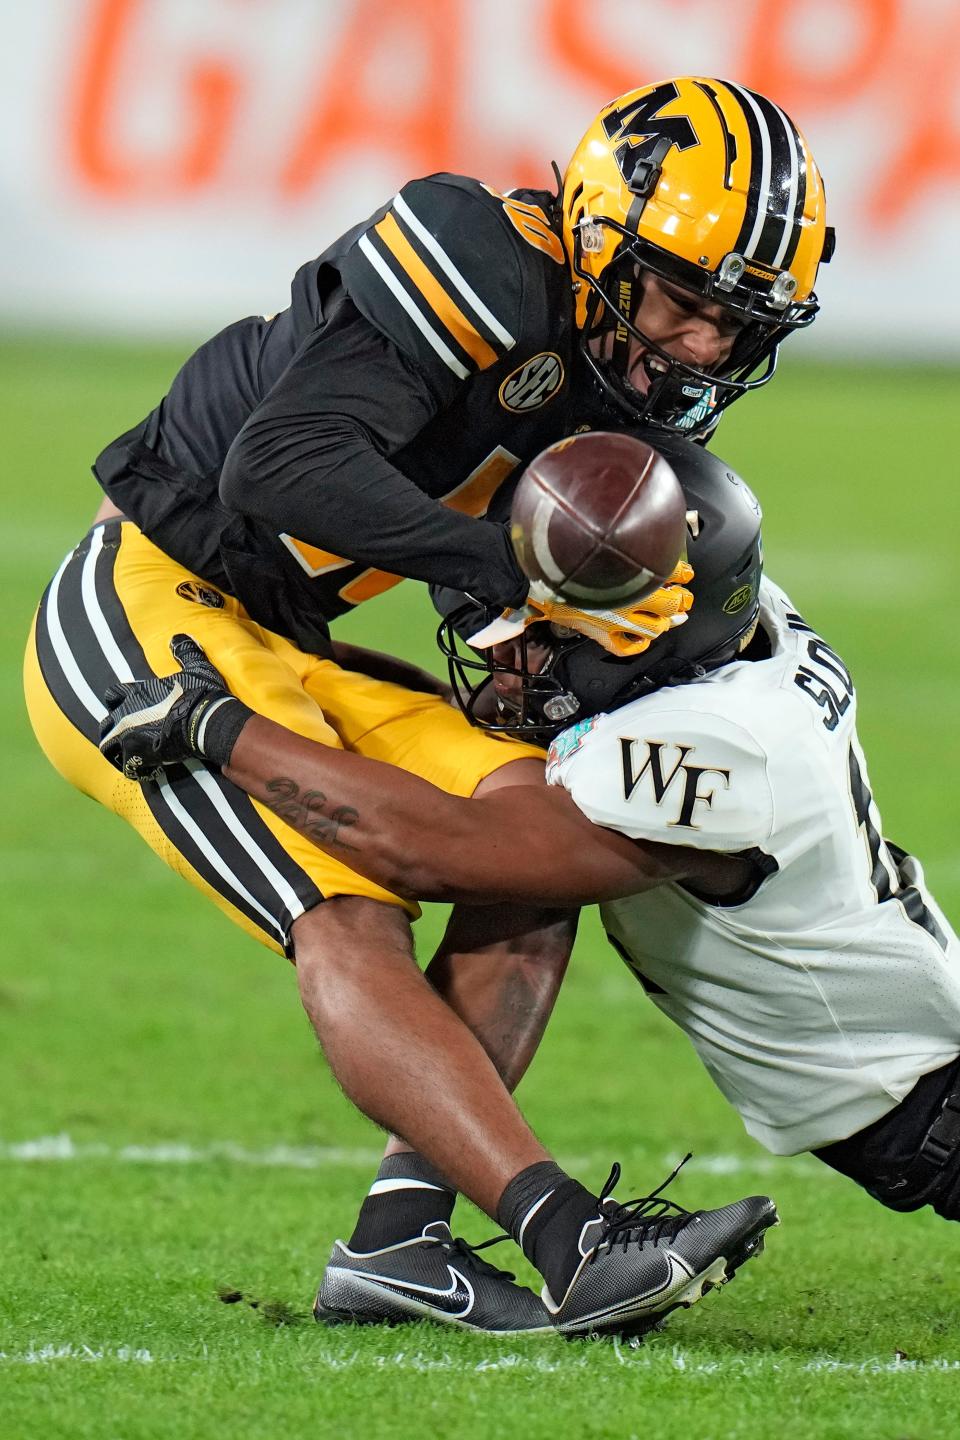 Missouri wide receiver Mekhi Miller (10) loses the ball after getting hit by Wake Forest defensive back Evan Slocum (14) during the first half of the Gasparilla Bowl NCAA college football game Friday, Dec. 23, 2022, in Tampa, Fla. The pass was ruled incomplete.